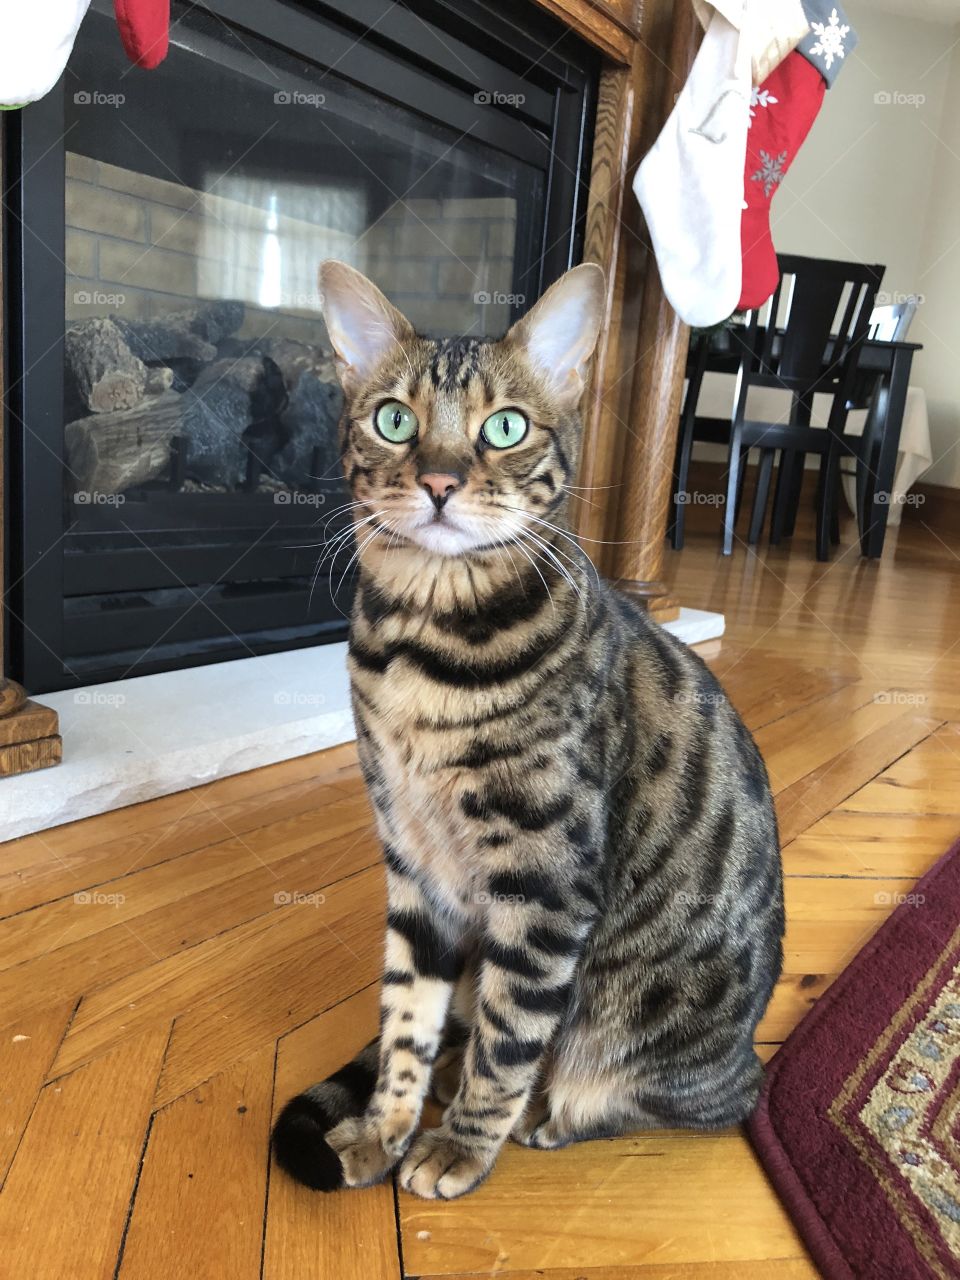 Crick the Bengal looming off in the distance, probably at a squirrel through the window.